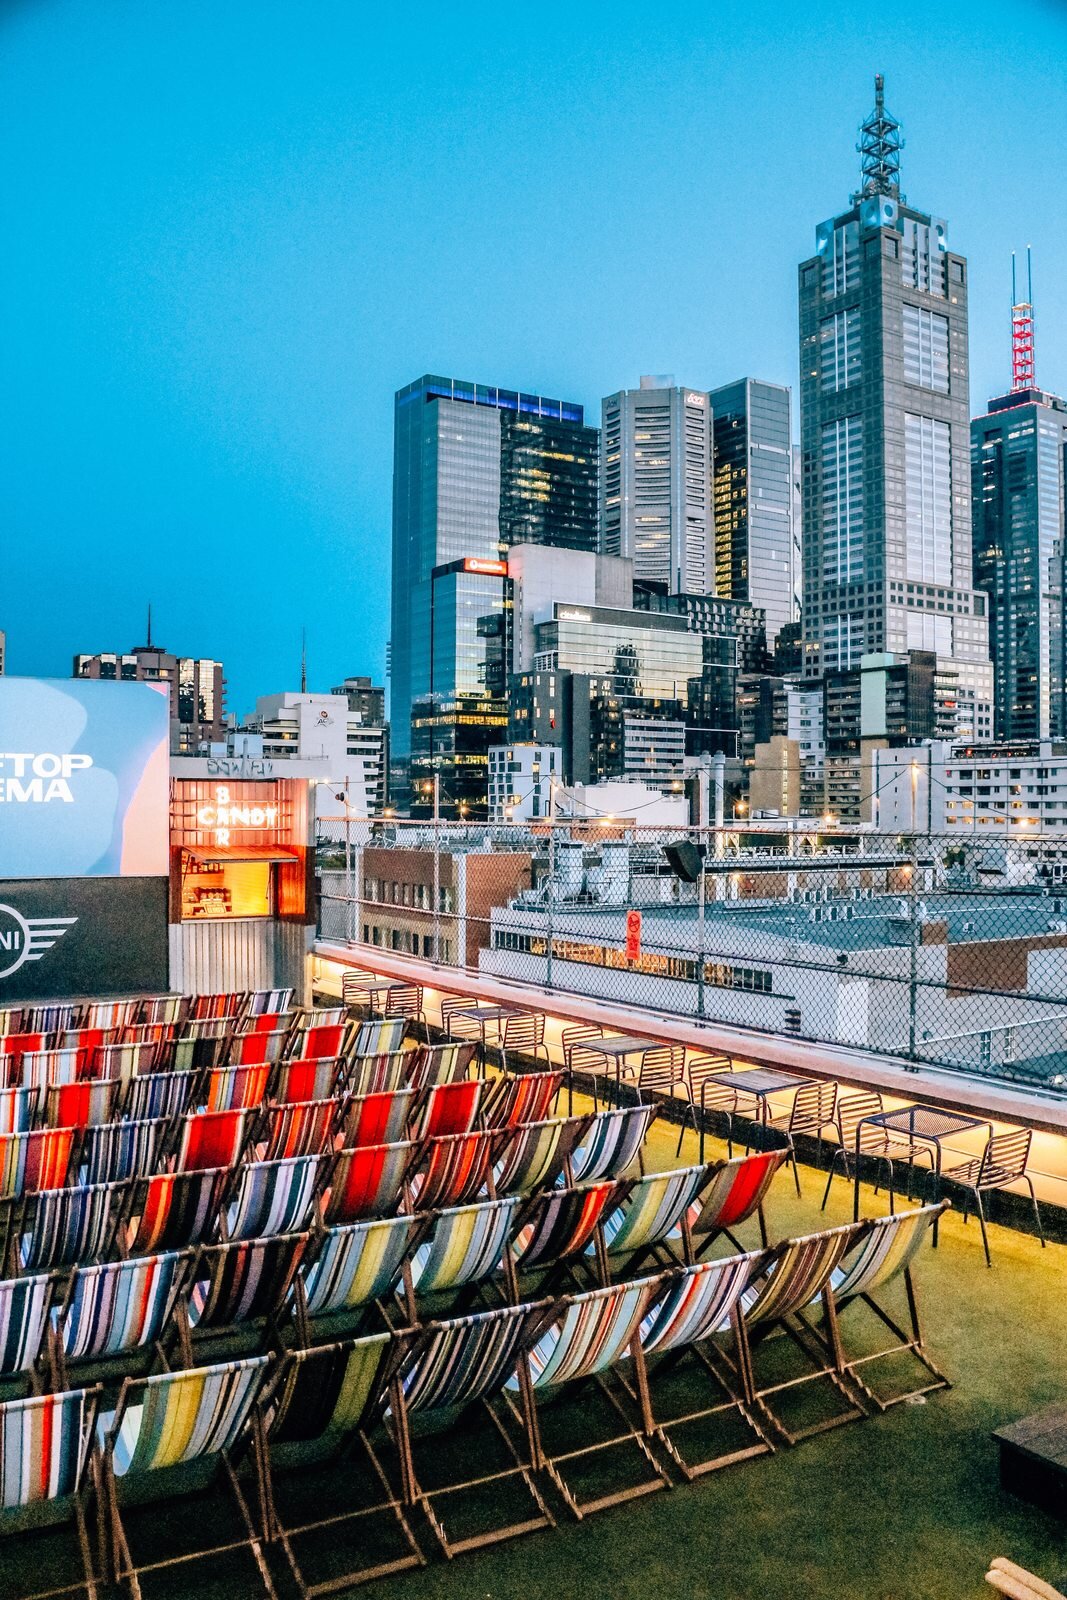 rooftop cinema in Melbourne, Australia at dusk with colourful deck chairs facing a large screen and skyscrapers in the background